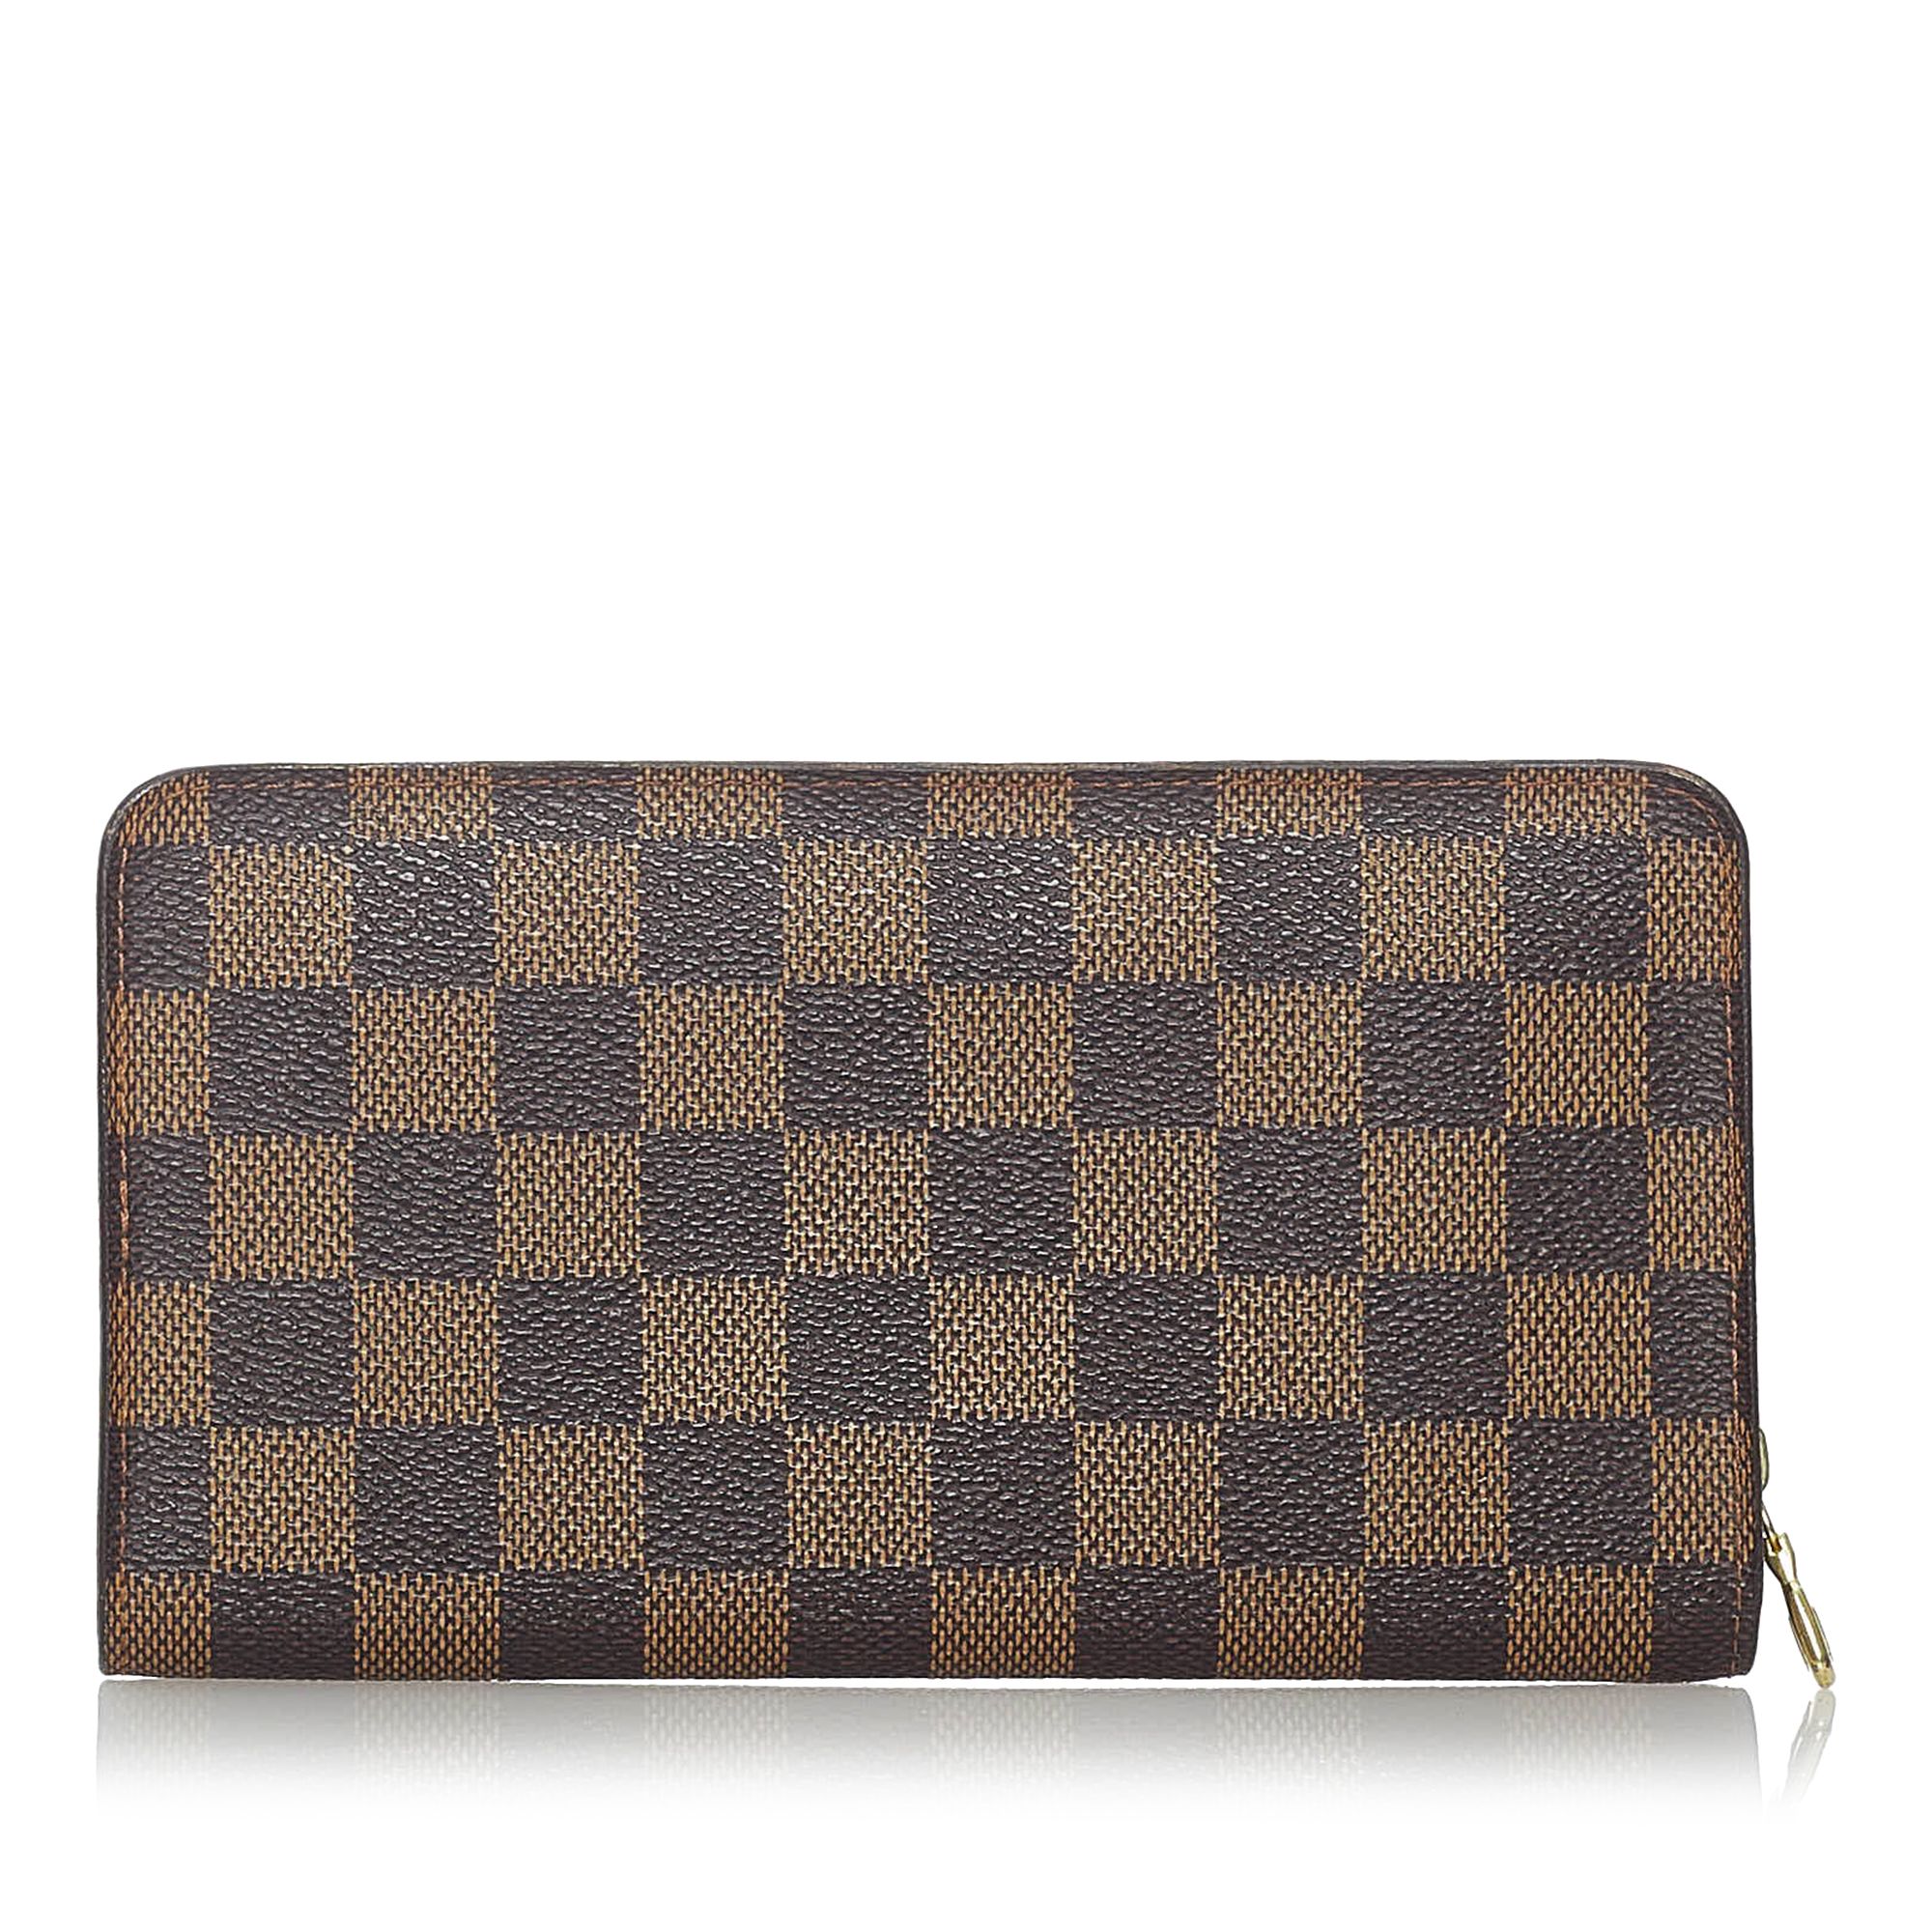 VINTAGE. RRP AS NEW. The Zippy Wallet features a damier canvas body, a zip around closure, an interior zip compartment, and interior slip pockets.Exterior back is cracked and out of shape. Exterior bottom is scratched. Exterior front is cracked and out of shape. Exterior side is scratched. Zipper is scratched.

Dimensions:
Length 10cm
Width 18.5cm

Original Accessories: This item has no other original accessories.

Serial Number: CA0054
Color: Brown
Material: Canvas x Damier Canvas
Country of Origin: France
Boutique Reference: SSU162618K1342


Product Rating: GoodCondition

Certificate of Authenticity is available upon request with no extra fee required. Please contact our customer service team.